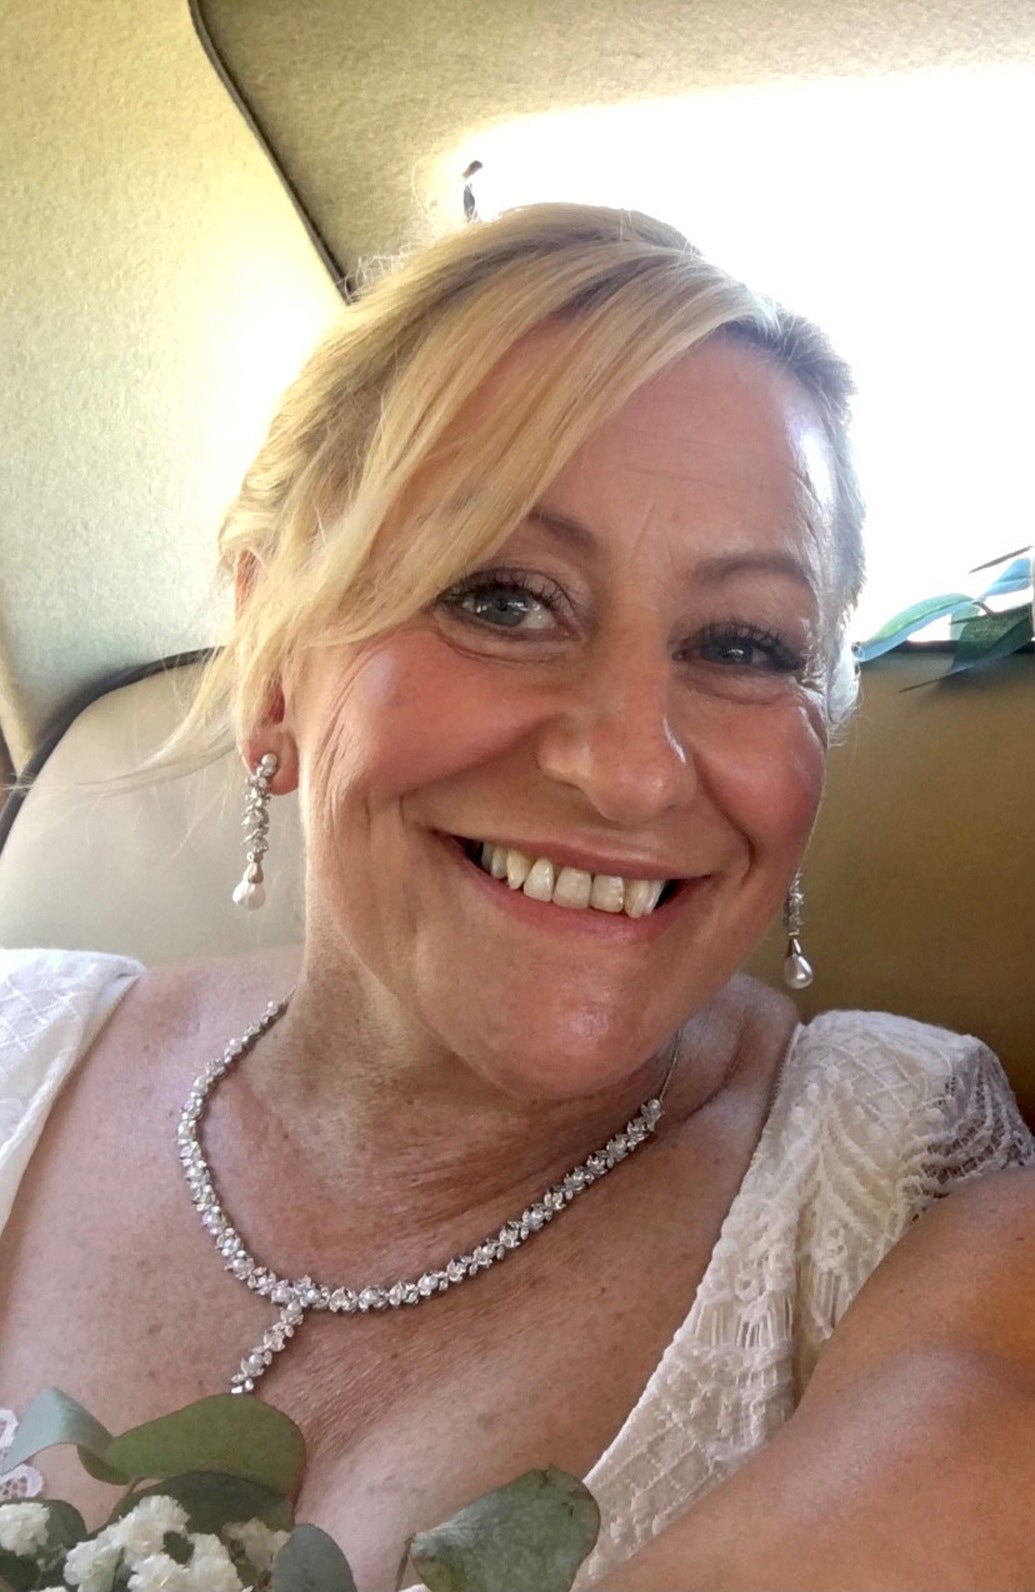 Julia James, 53, was a married mother-of-two and a PCSO who was off duty walking her dog Toby in woodland near her home in Snowdown, Kent, when she was killed